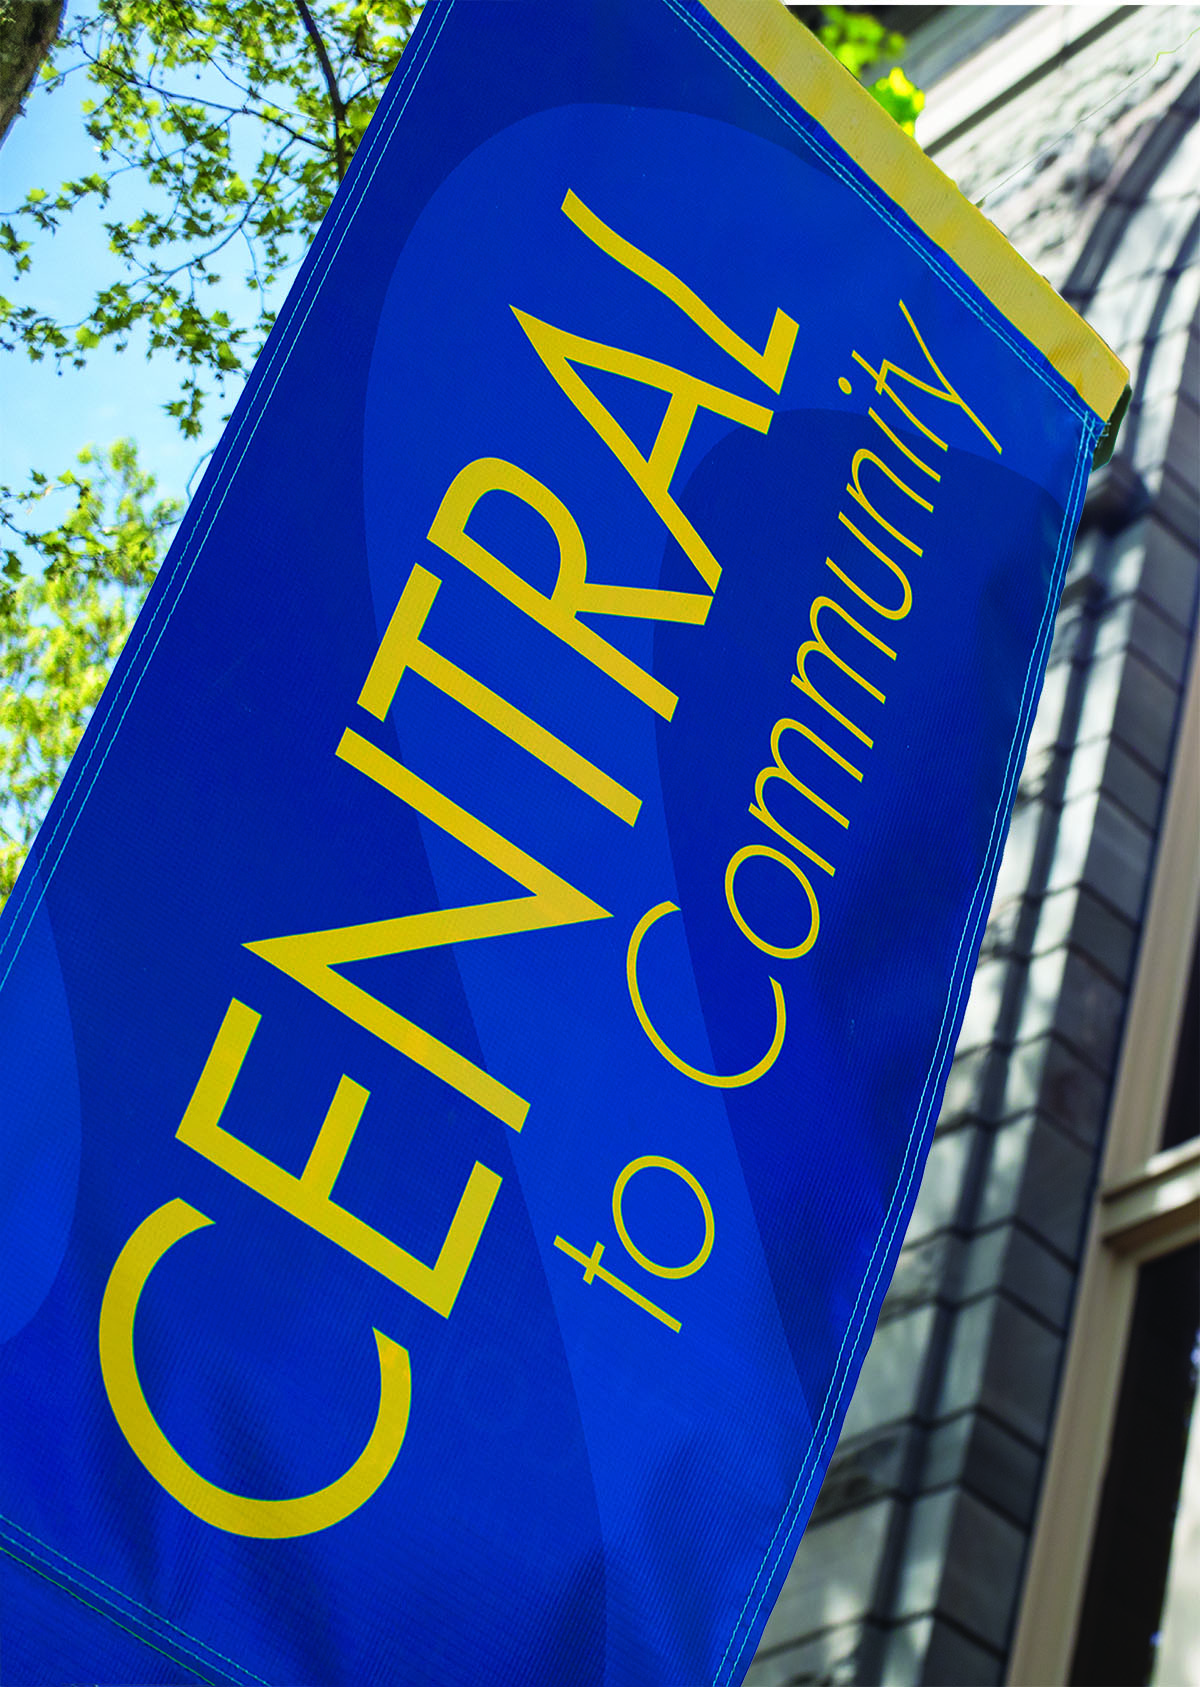 Central to the Community banner